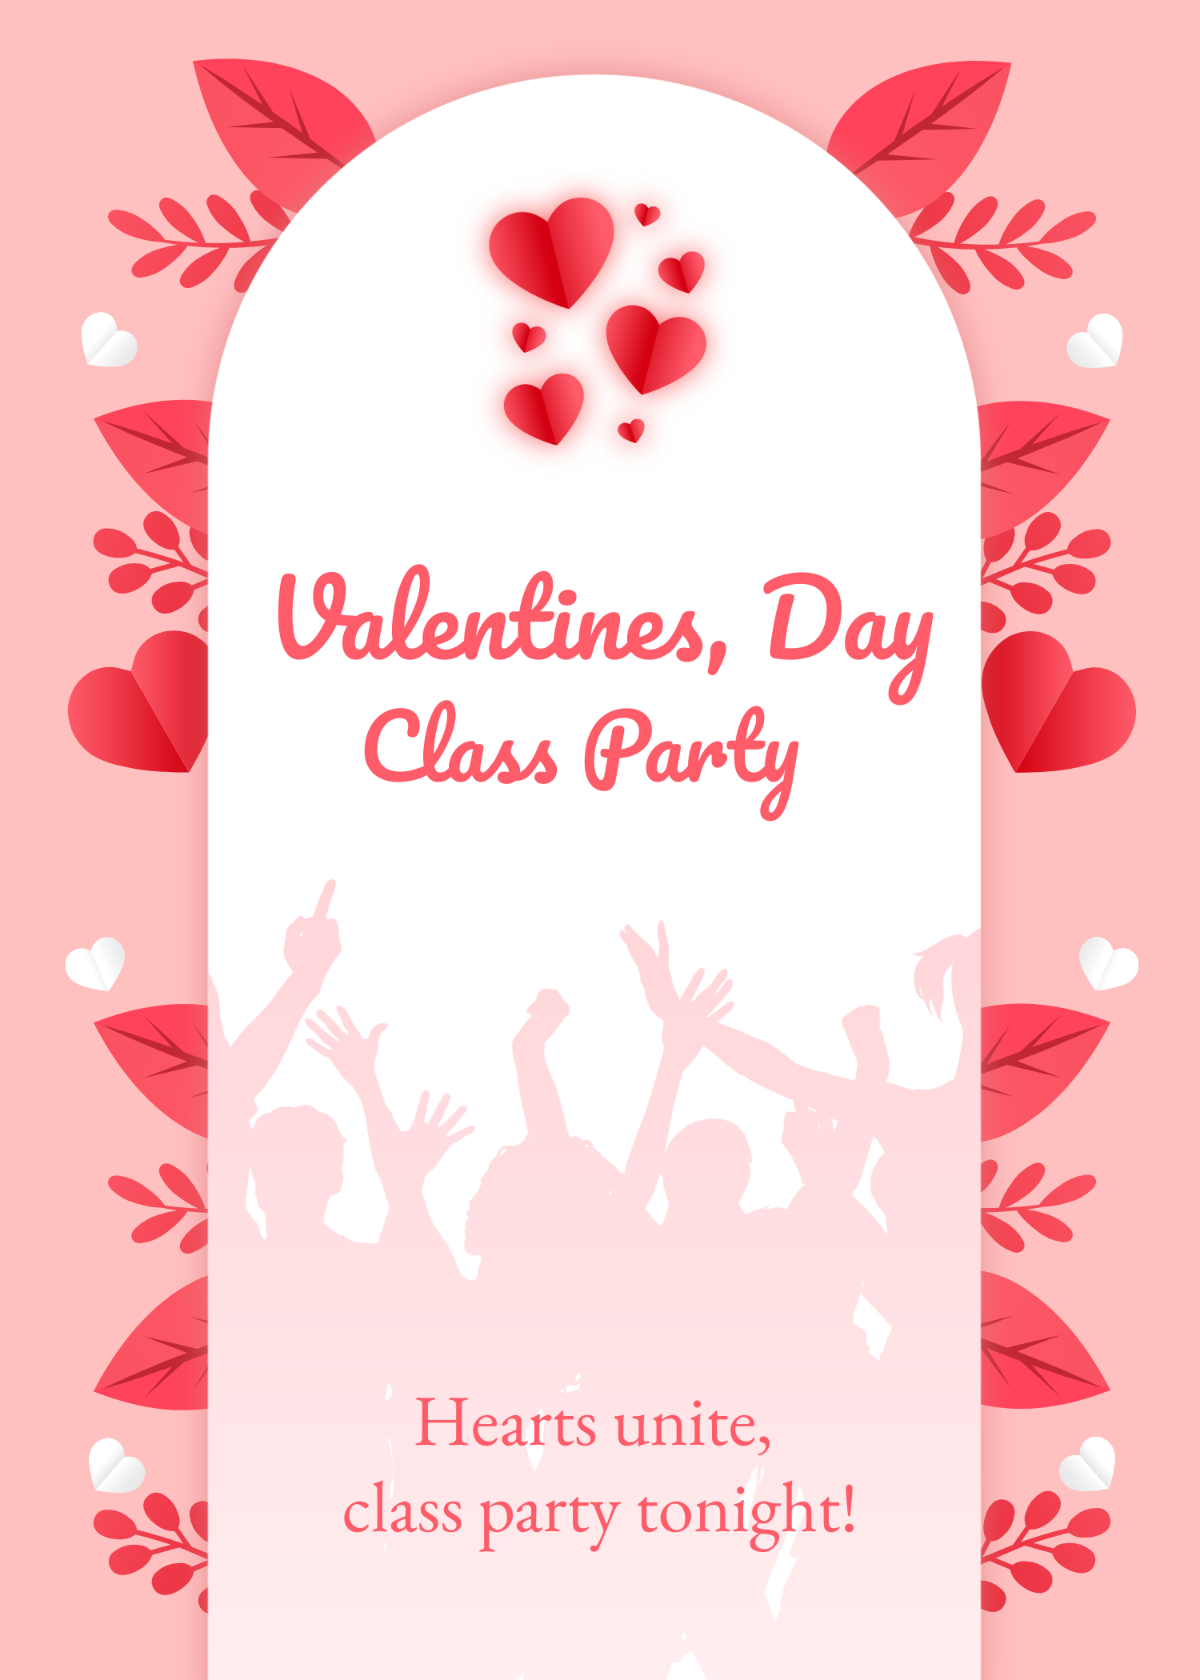 Valentine's Day Class Party Invitation Template